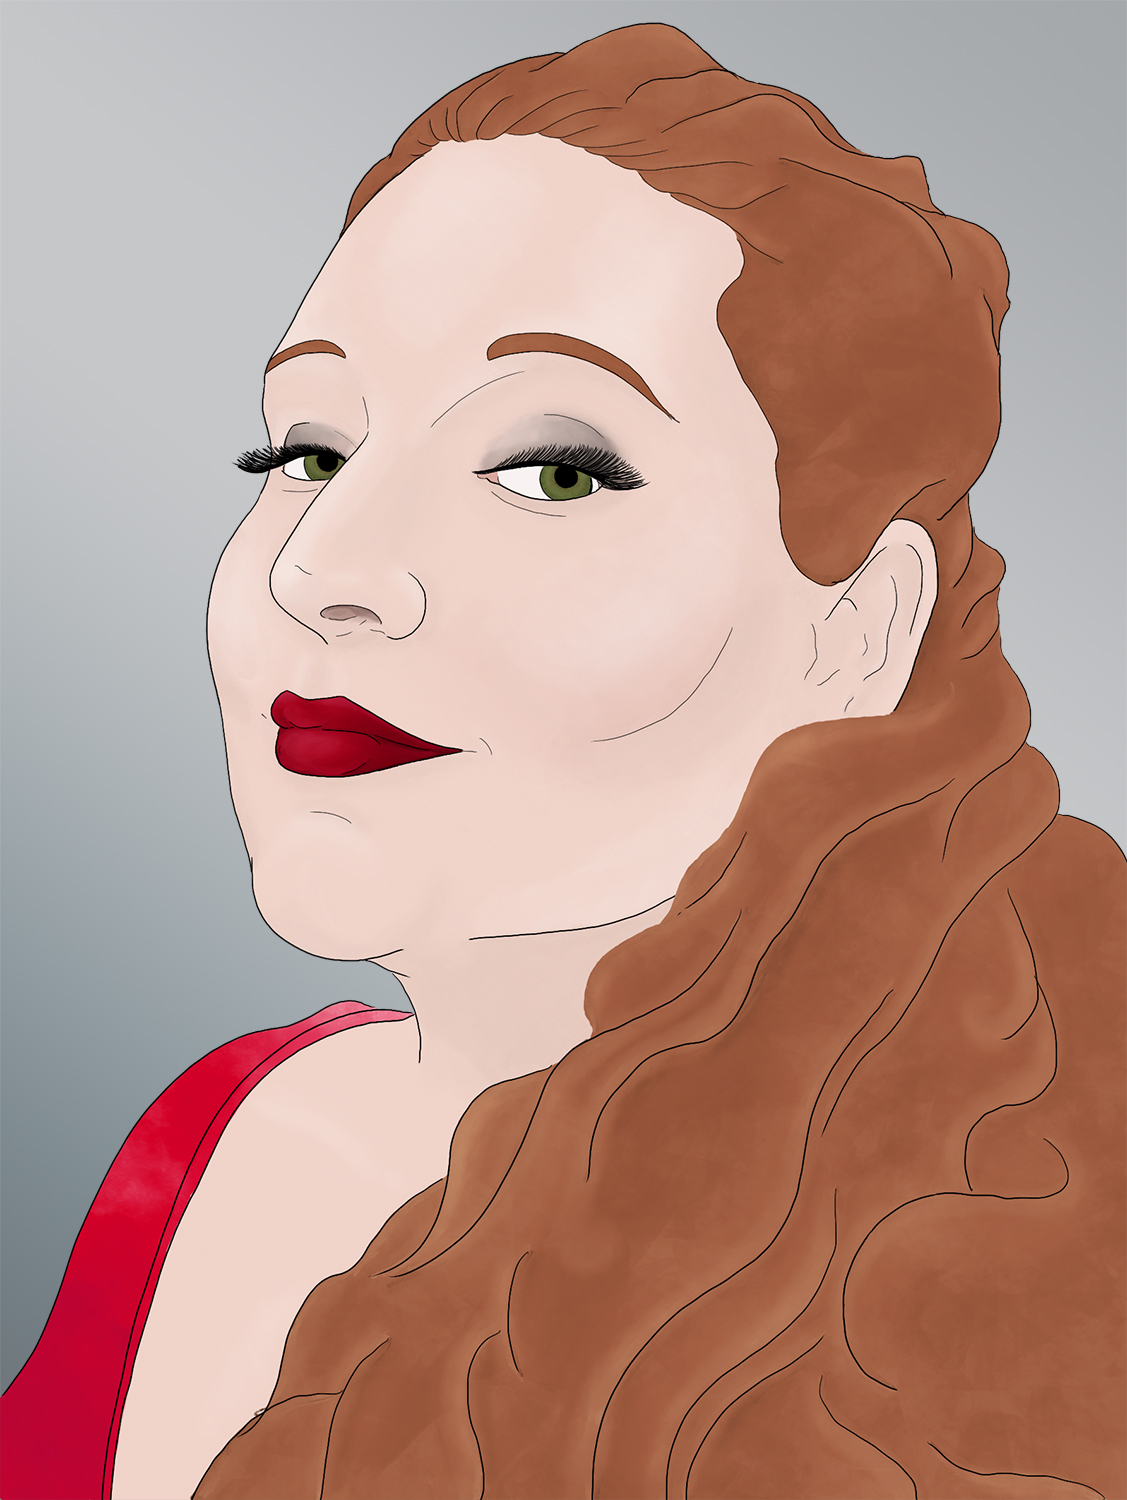 An illustrated self-portrait of Perfectly Pitched's founder, Heather Lawver